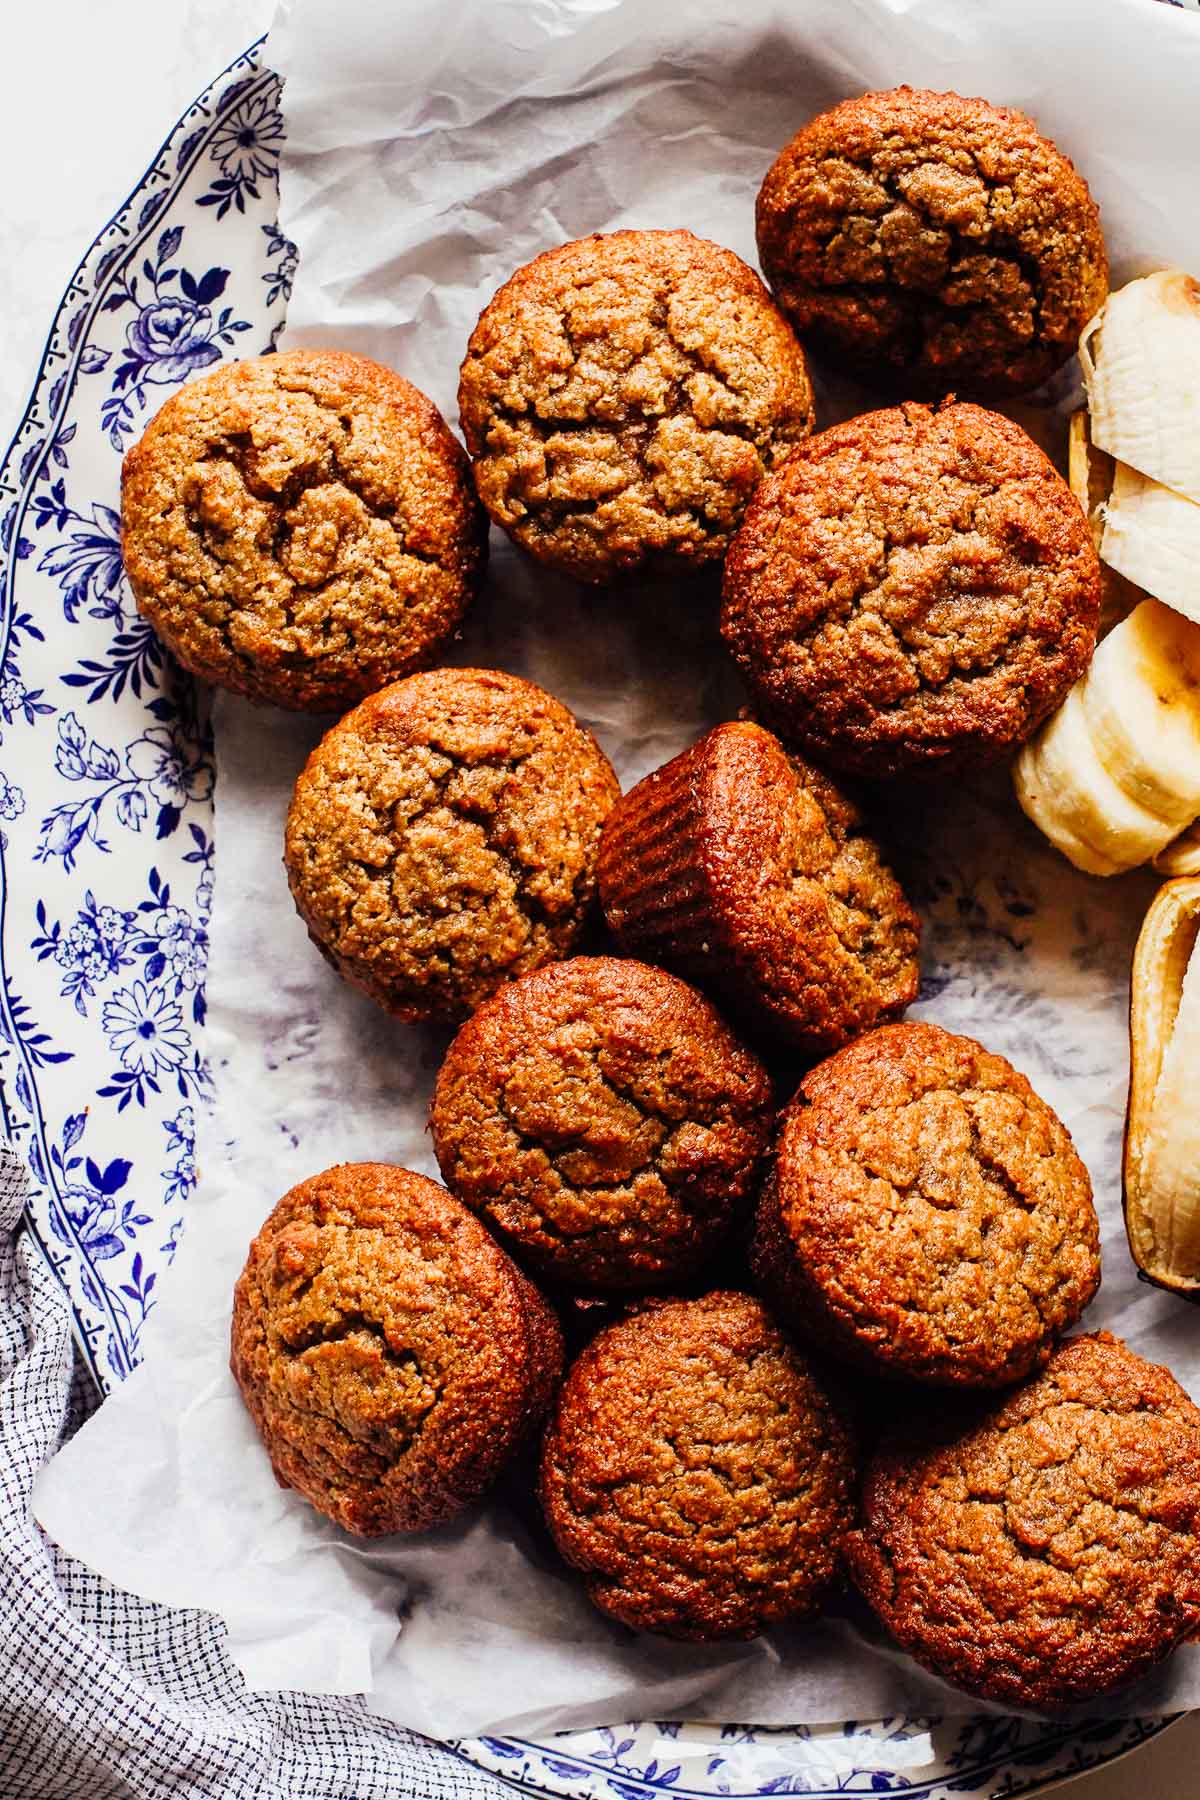 Banana muffins on a plate, all piled together.